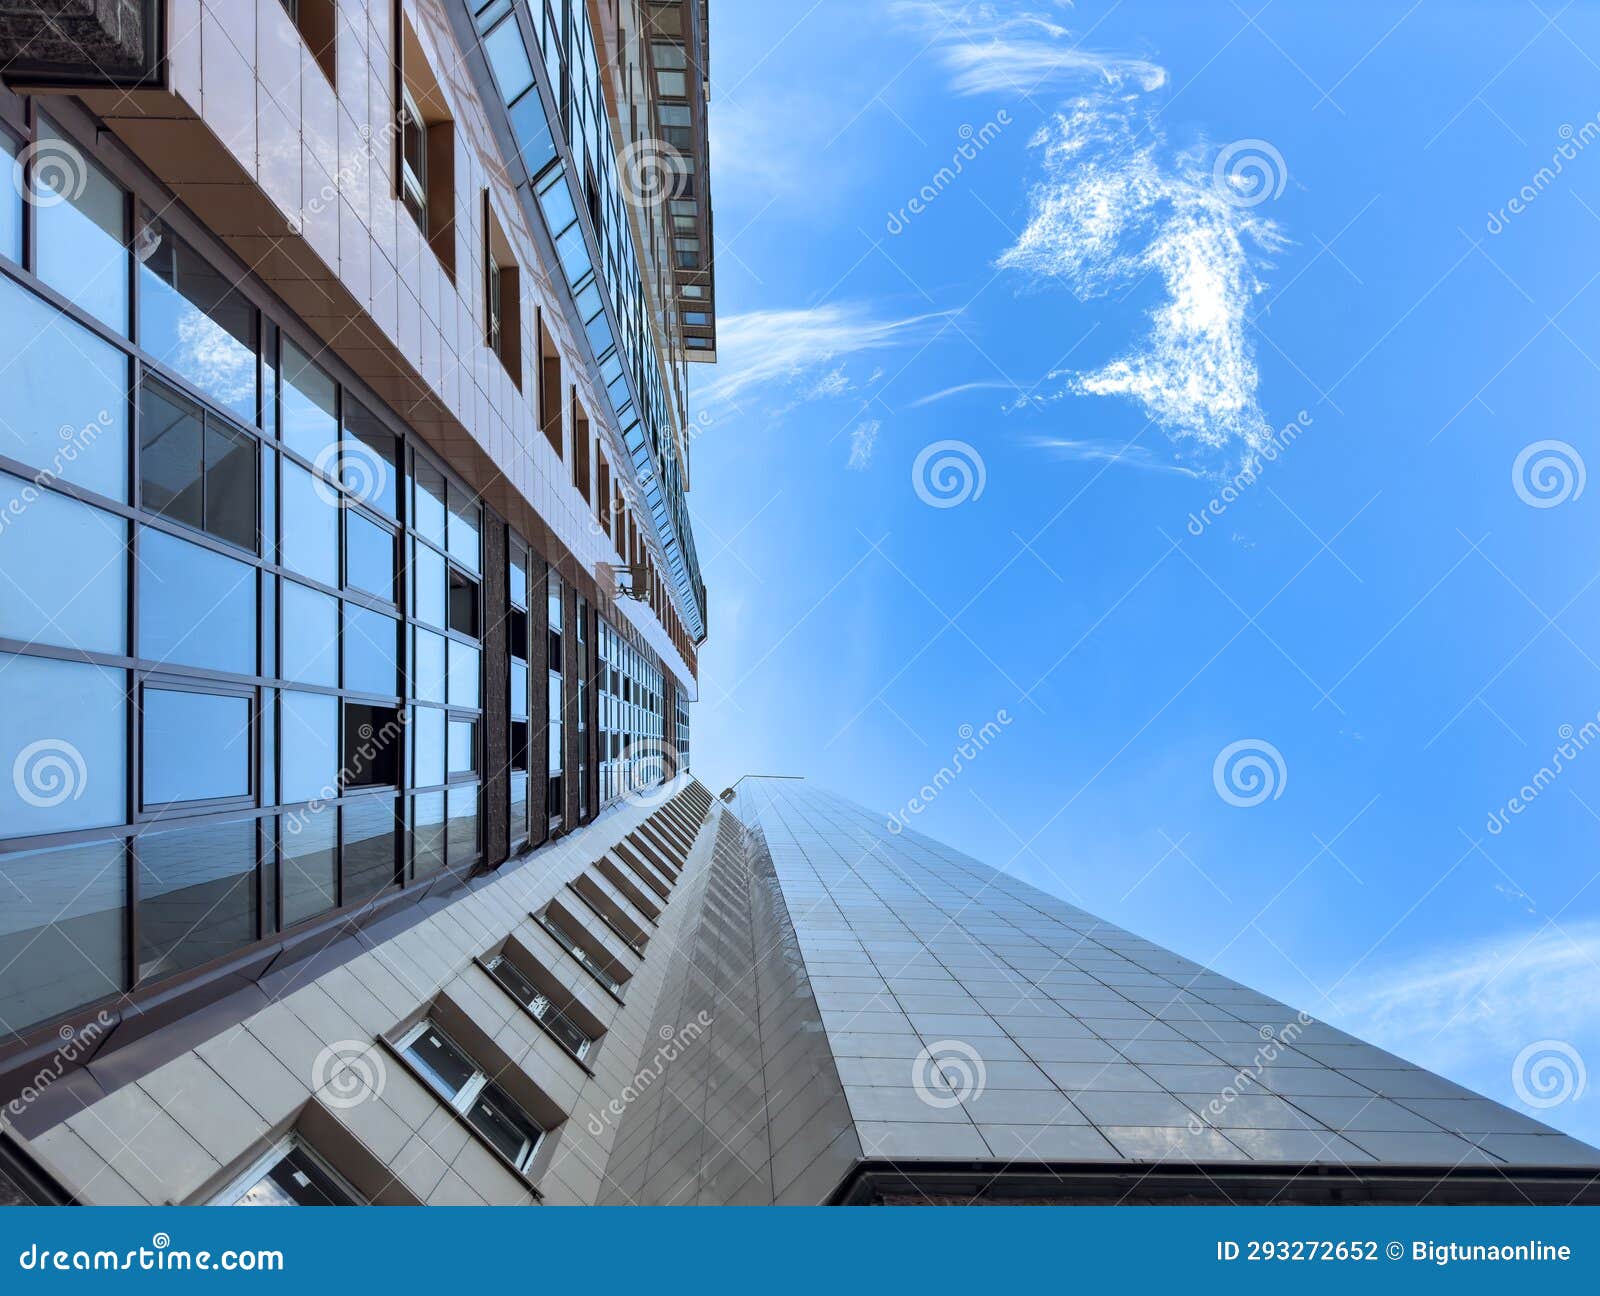 looking up downtown city skyscrappers with dramatic cloudy skies. modern building exterior